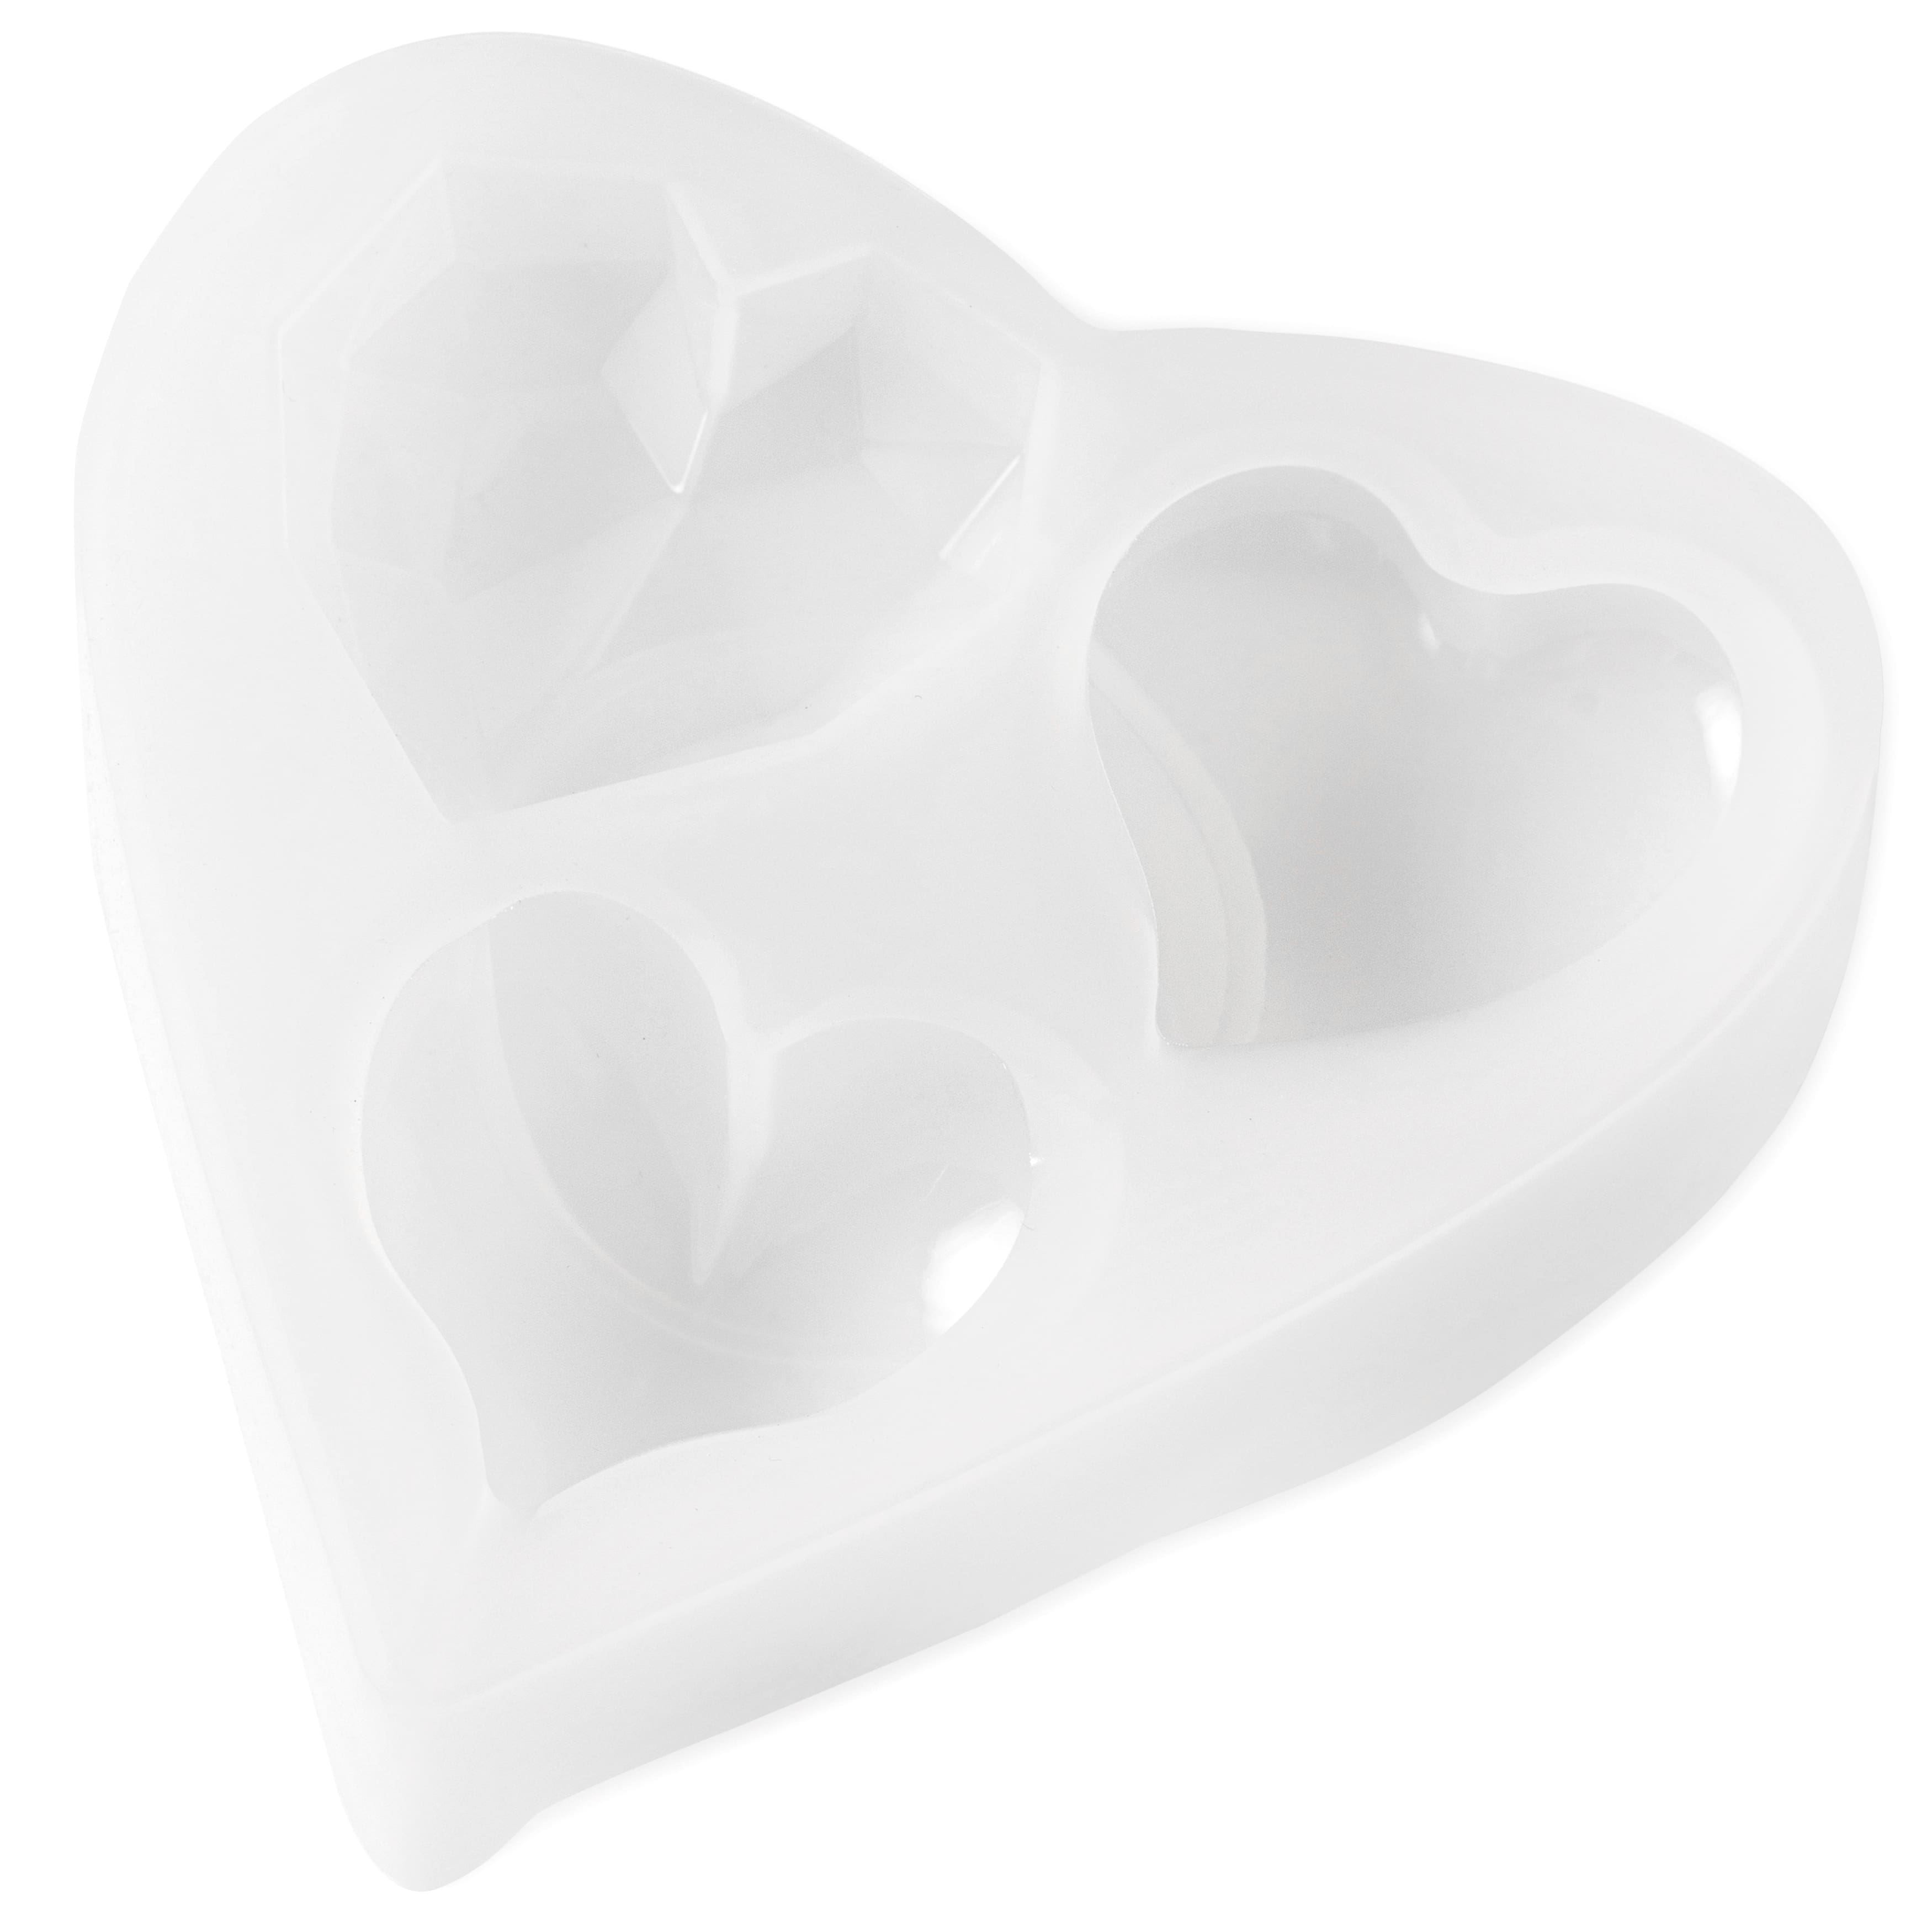 Craft Smart Hearts Silicone Mold - Each